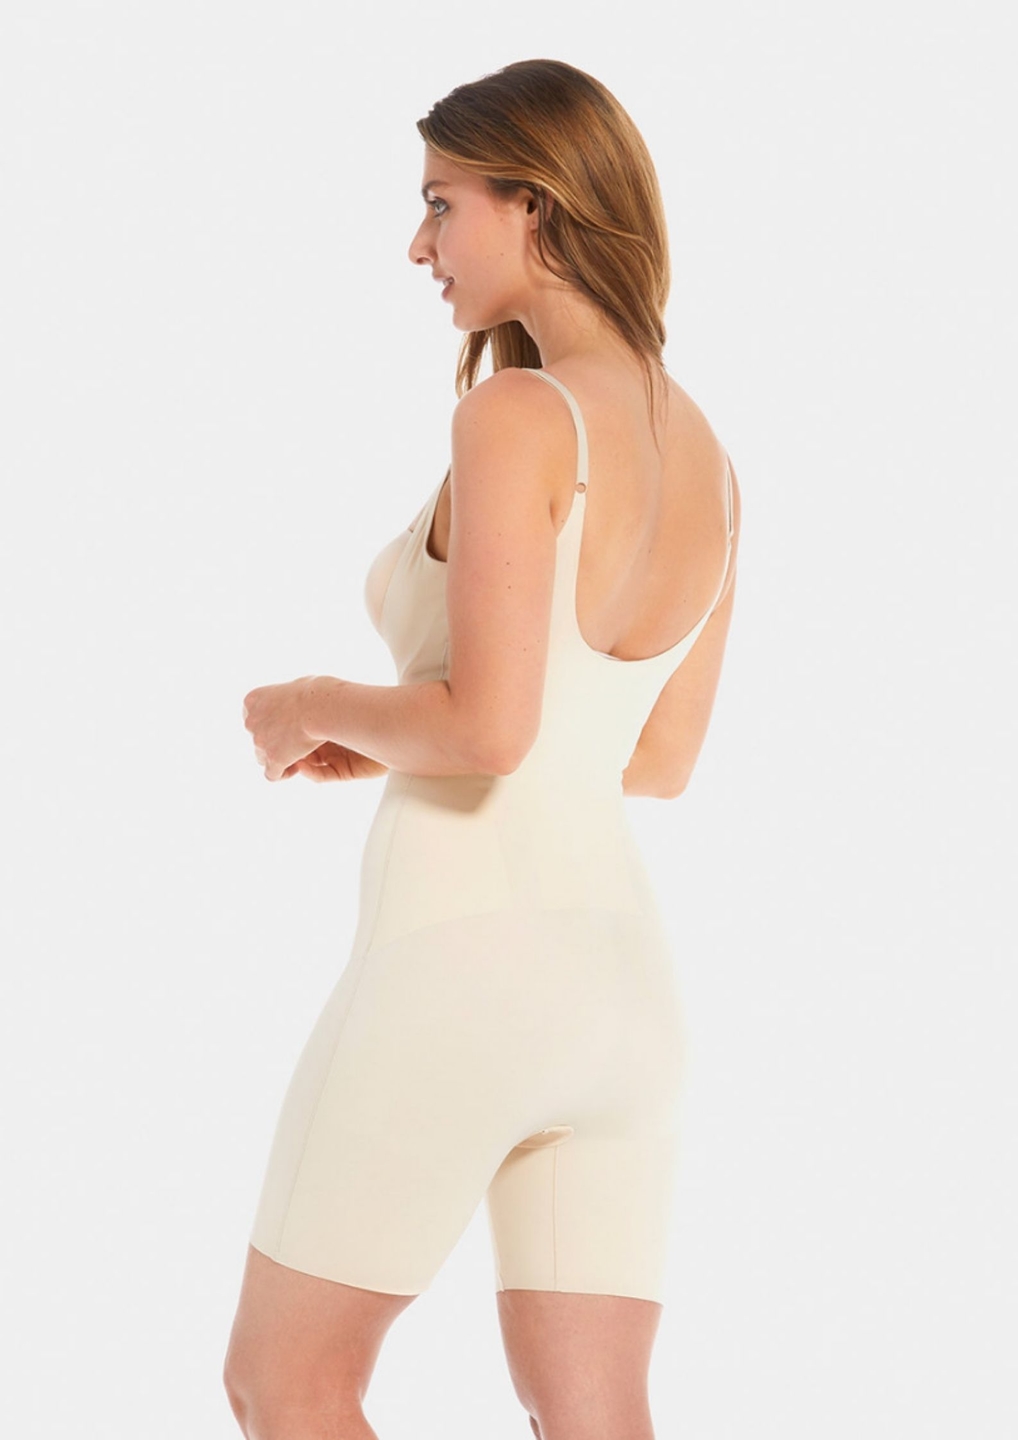 SPANX ASSETS Women's Remarkable Results All-in-One Body